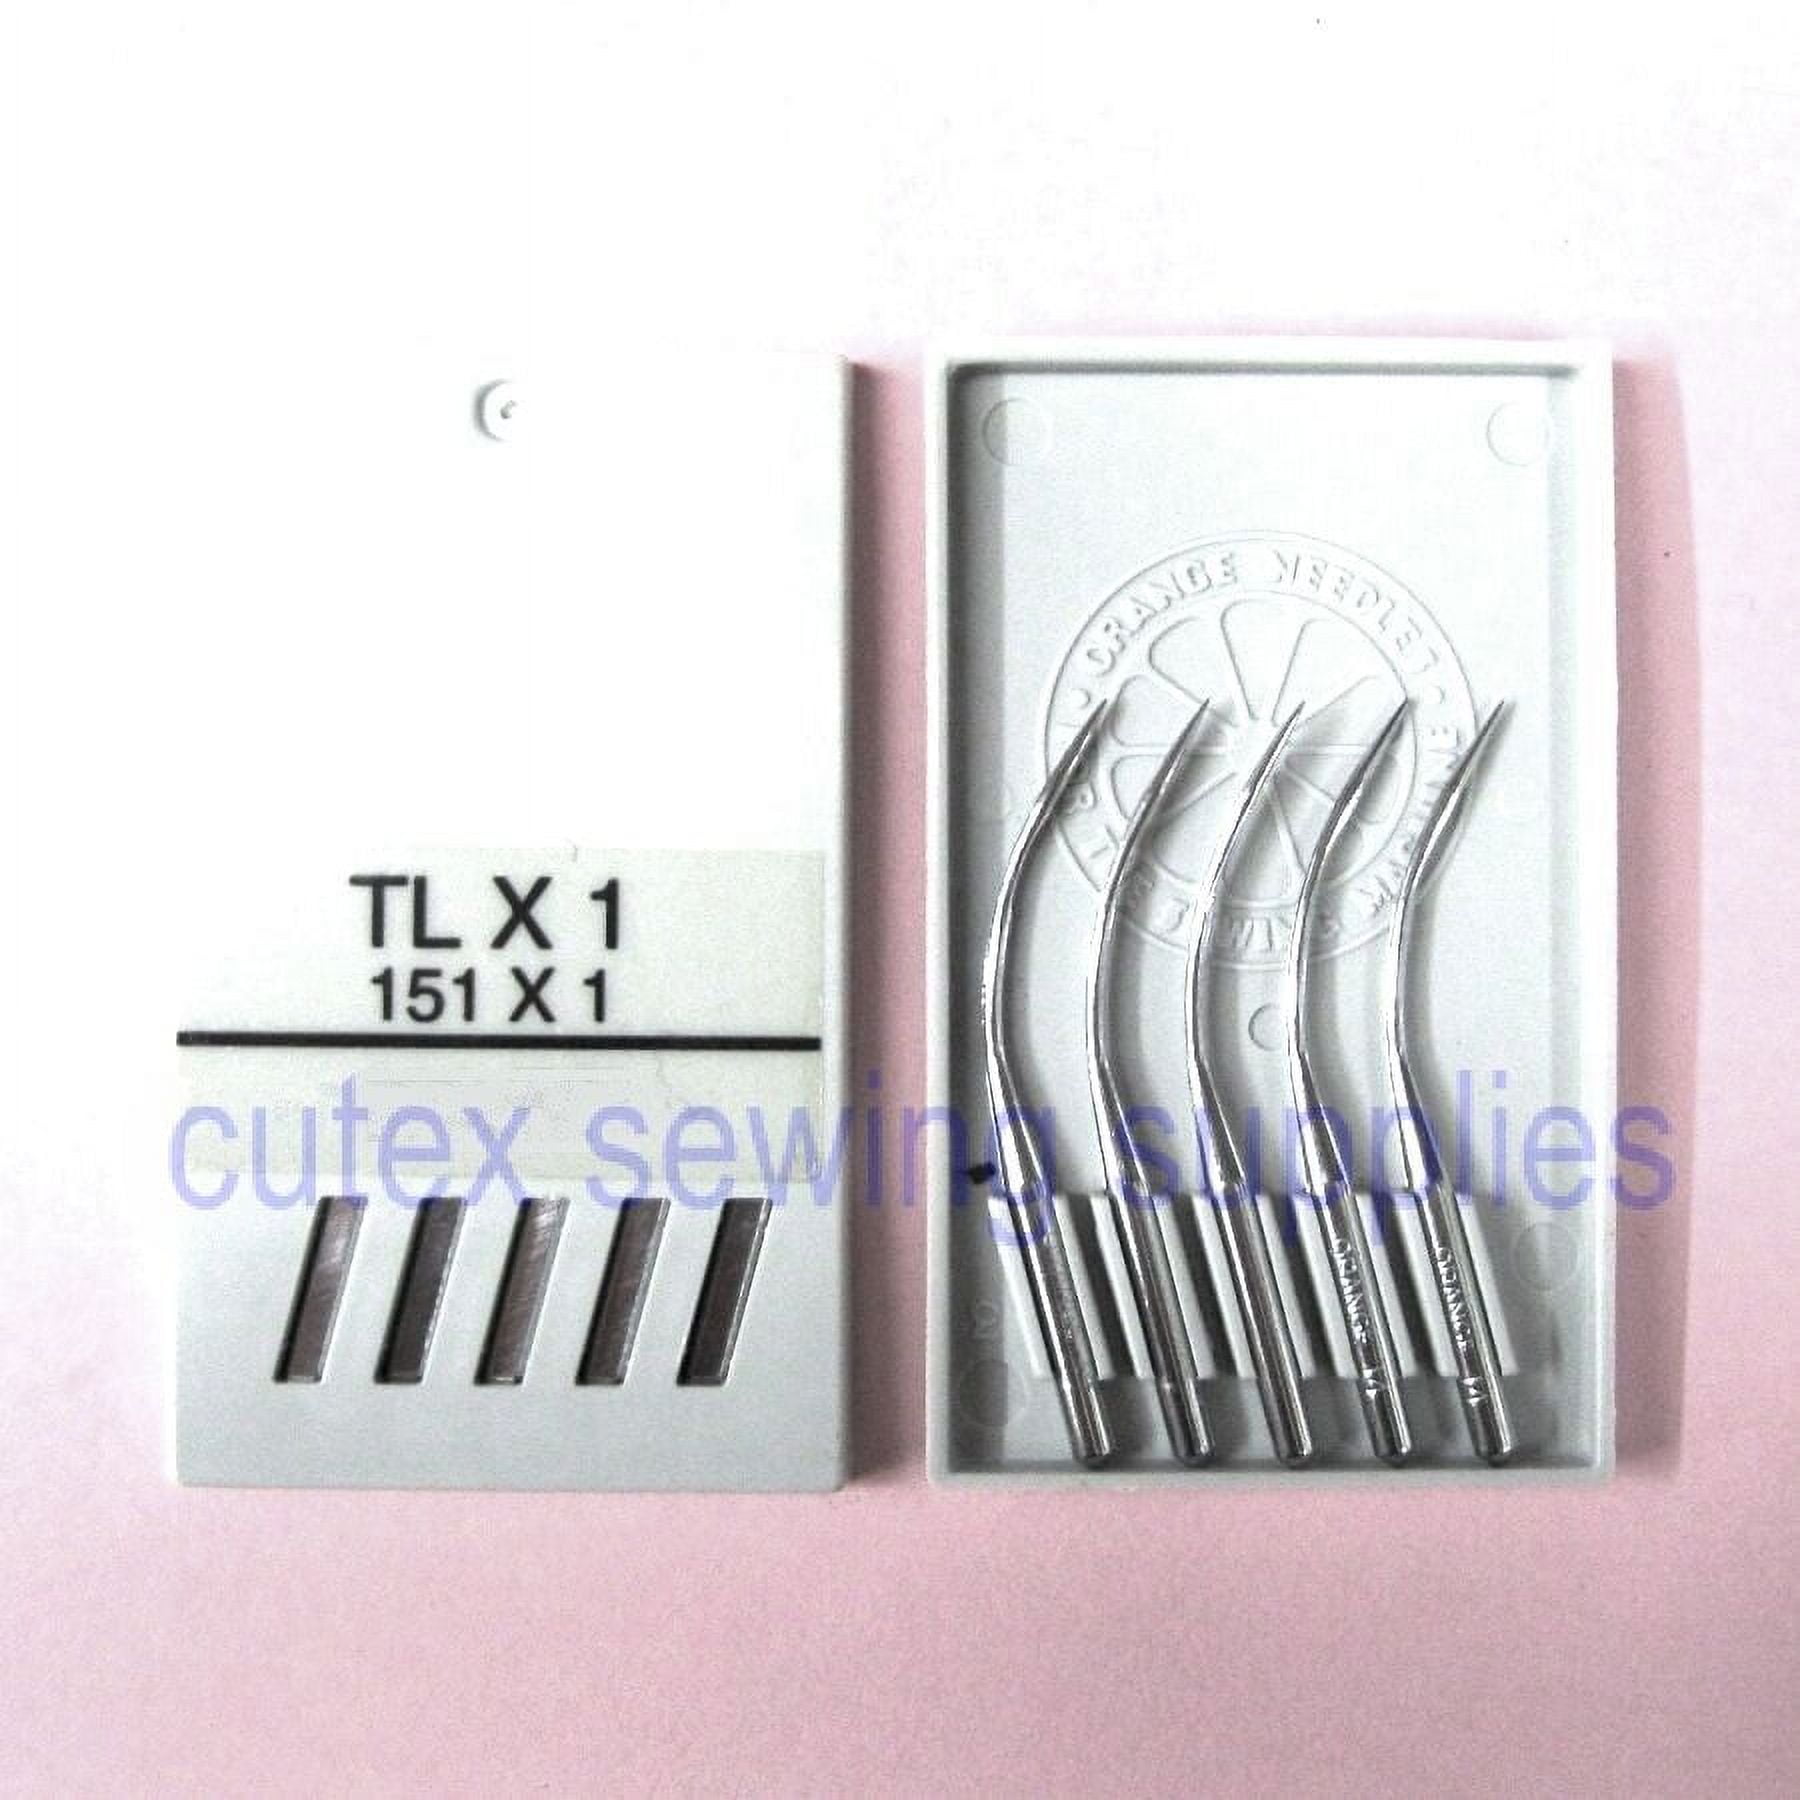 30 SCHMETZ 151X1 TLX1 Curved Sewing Needles For Singer 246, 246K